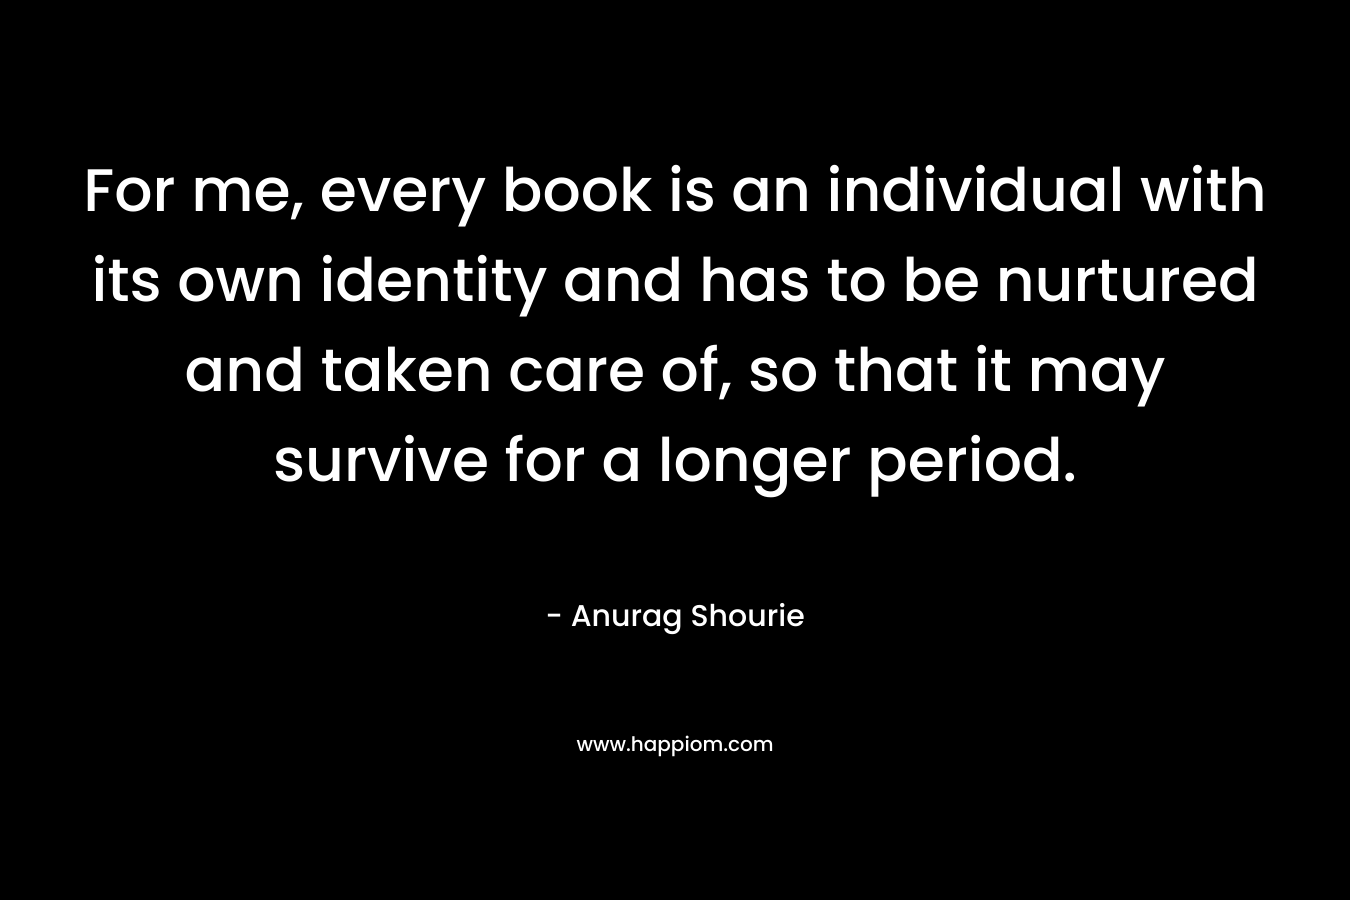 For me, every book is an individual with its own identity and has to be nurtured and taken care of, so that it may survive for a longer period. – Anurag Shourie